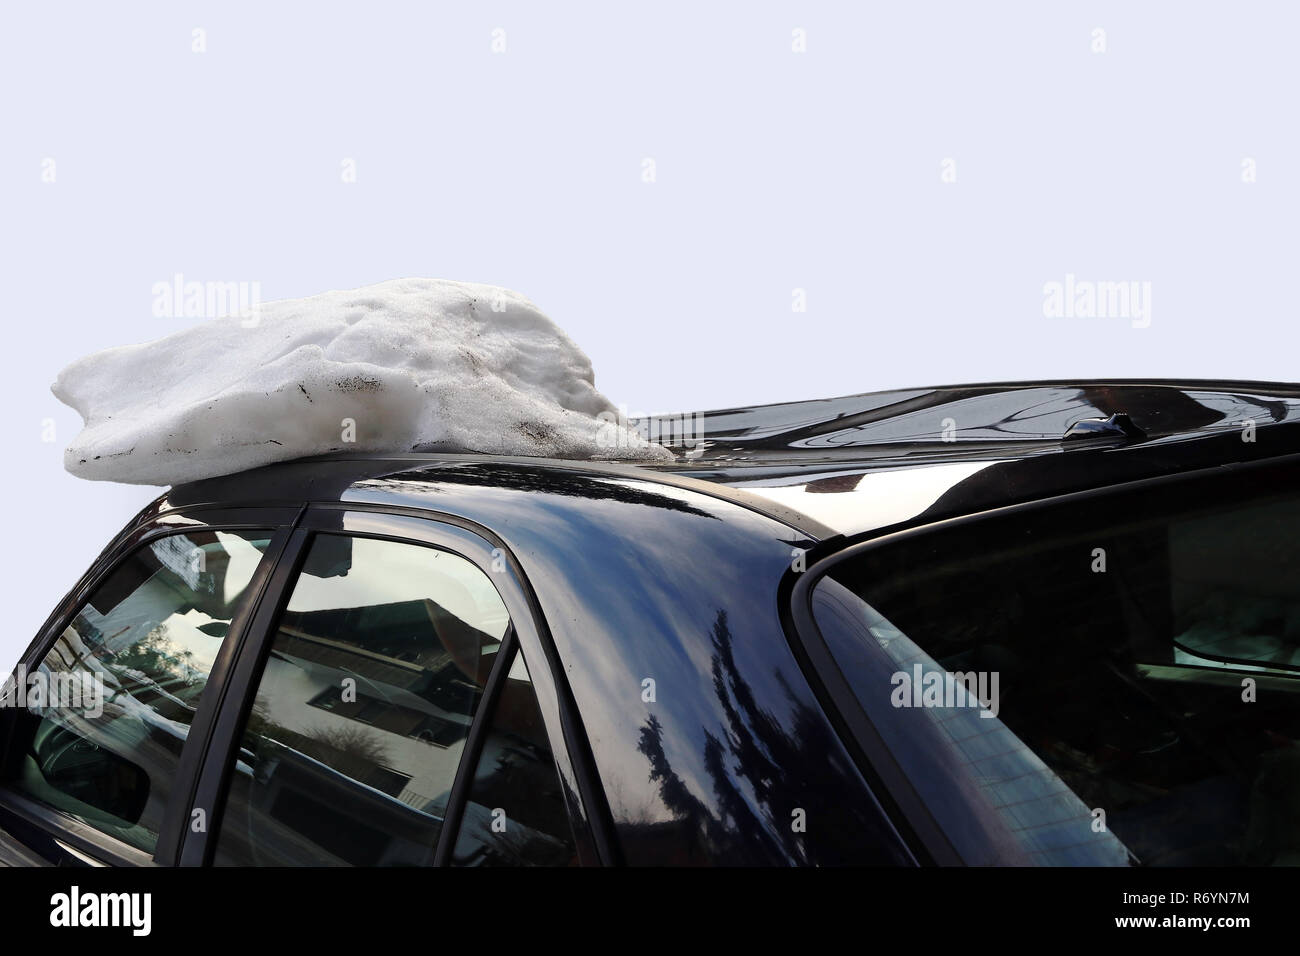 a roof avalanche severely damaged a black car on the roof. damaged by a roof avalanche on a car Stock Photo